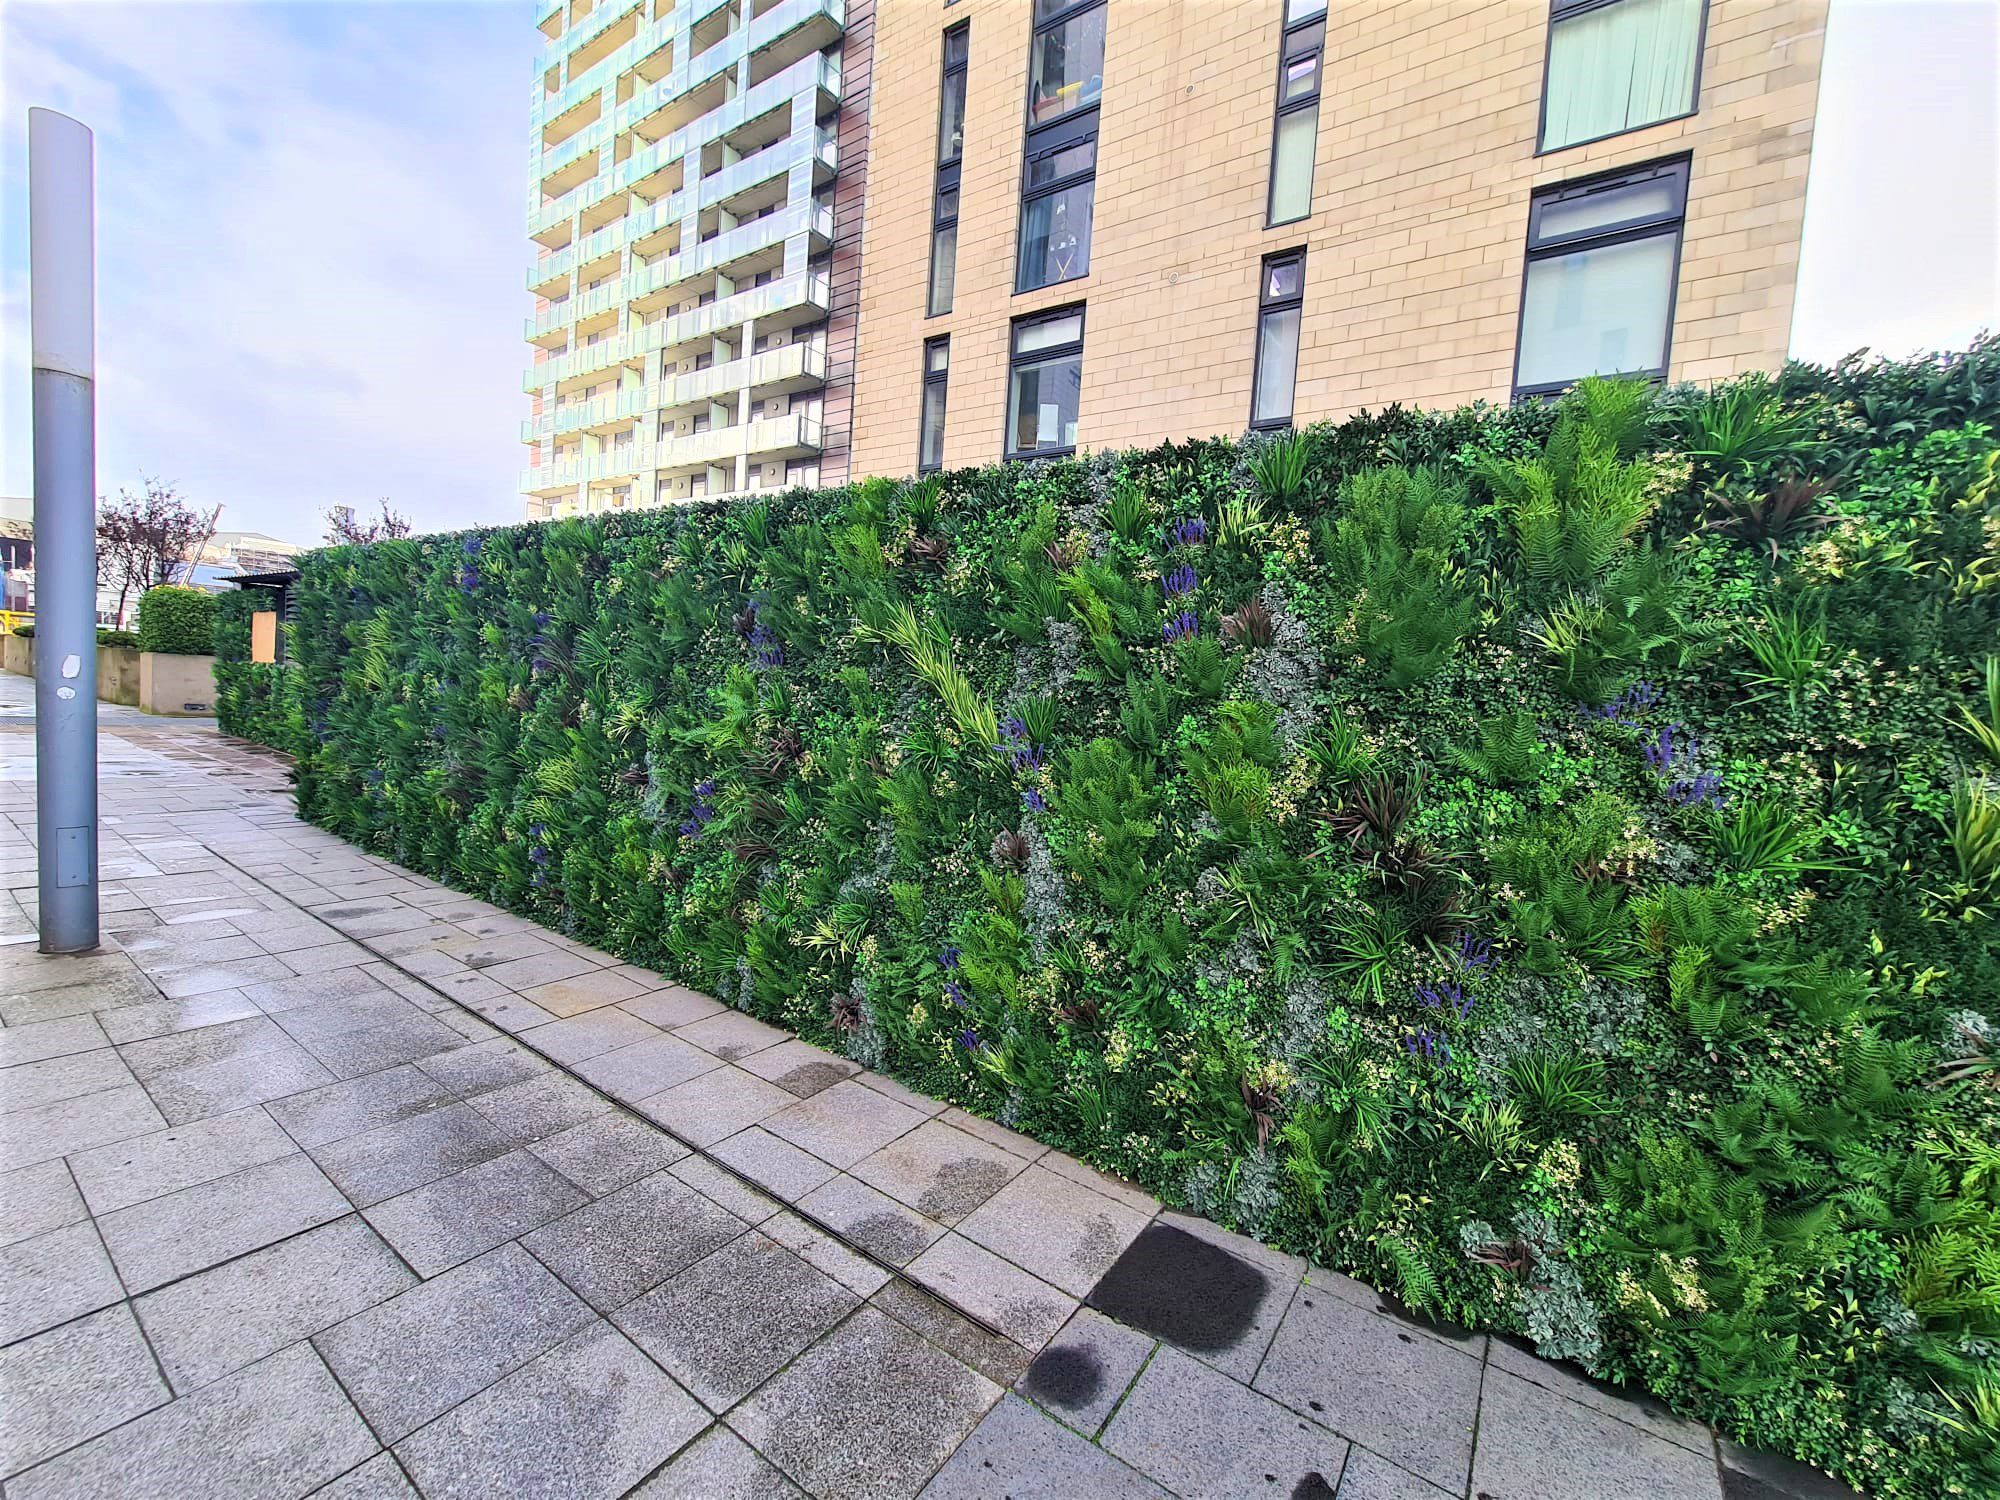 Artificial Living Wall Installation in Glasgow, Scotland